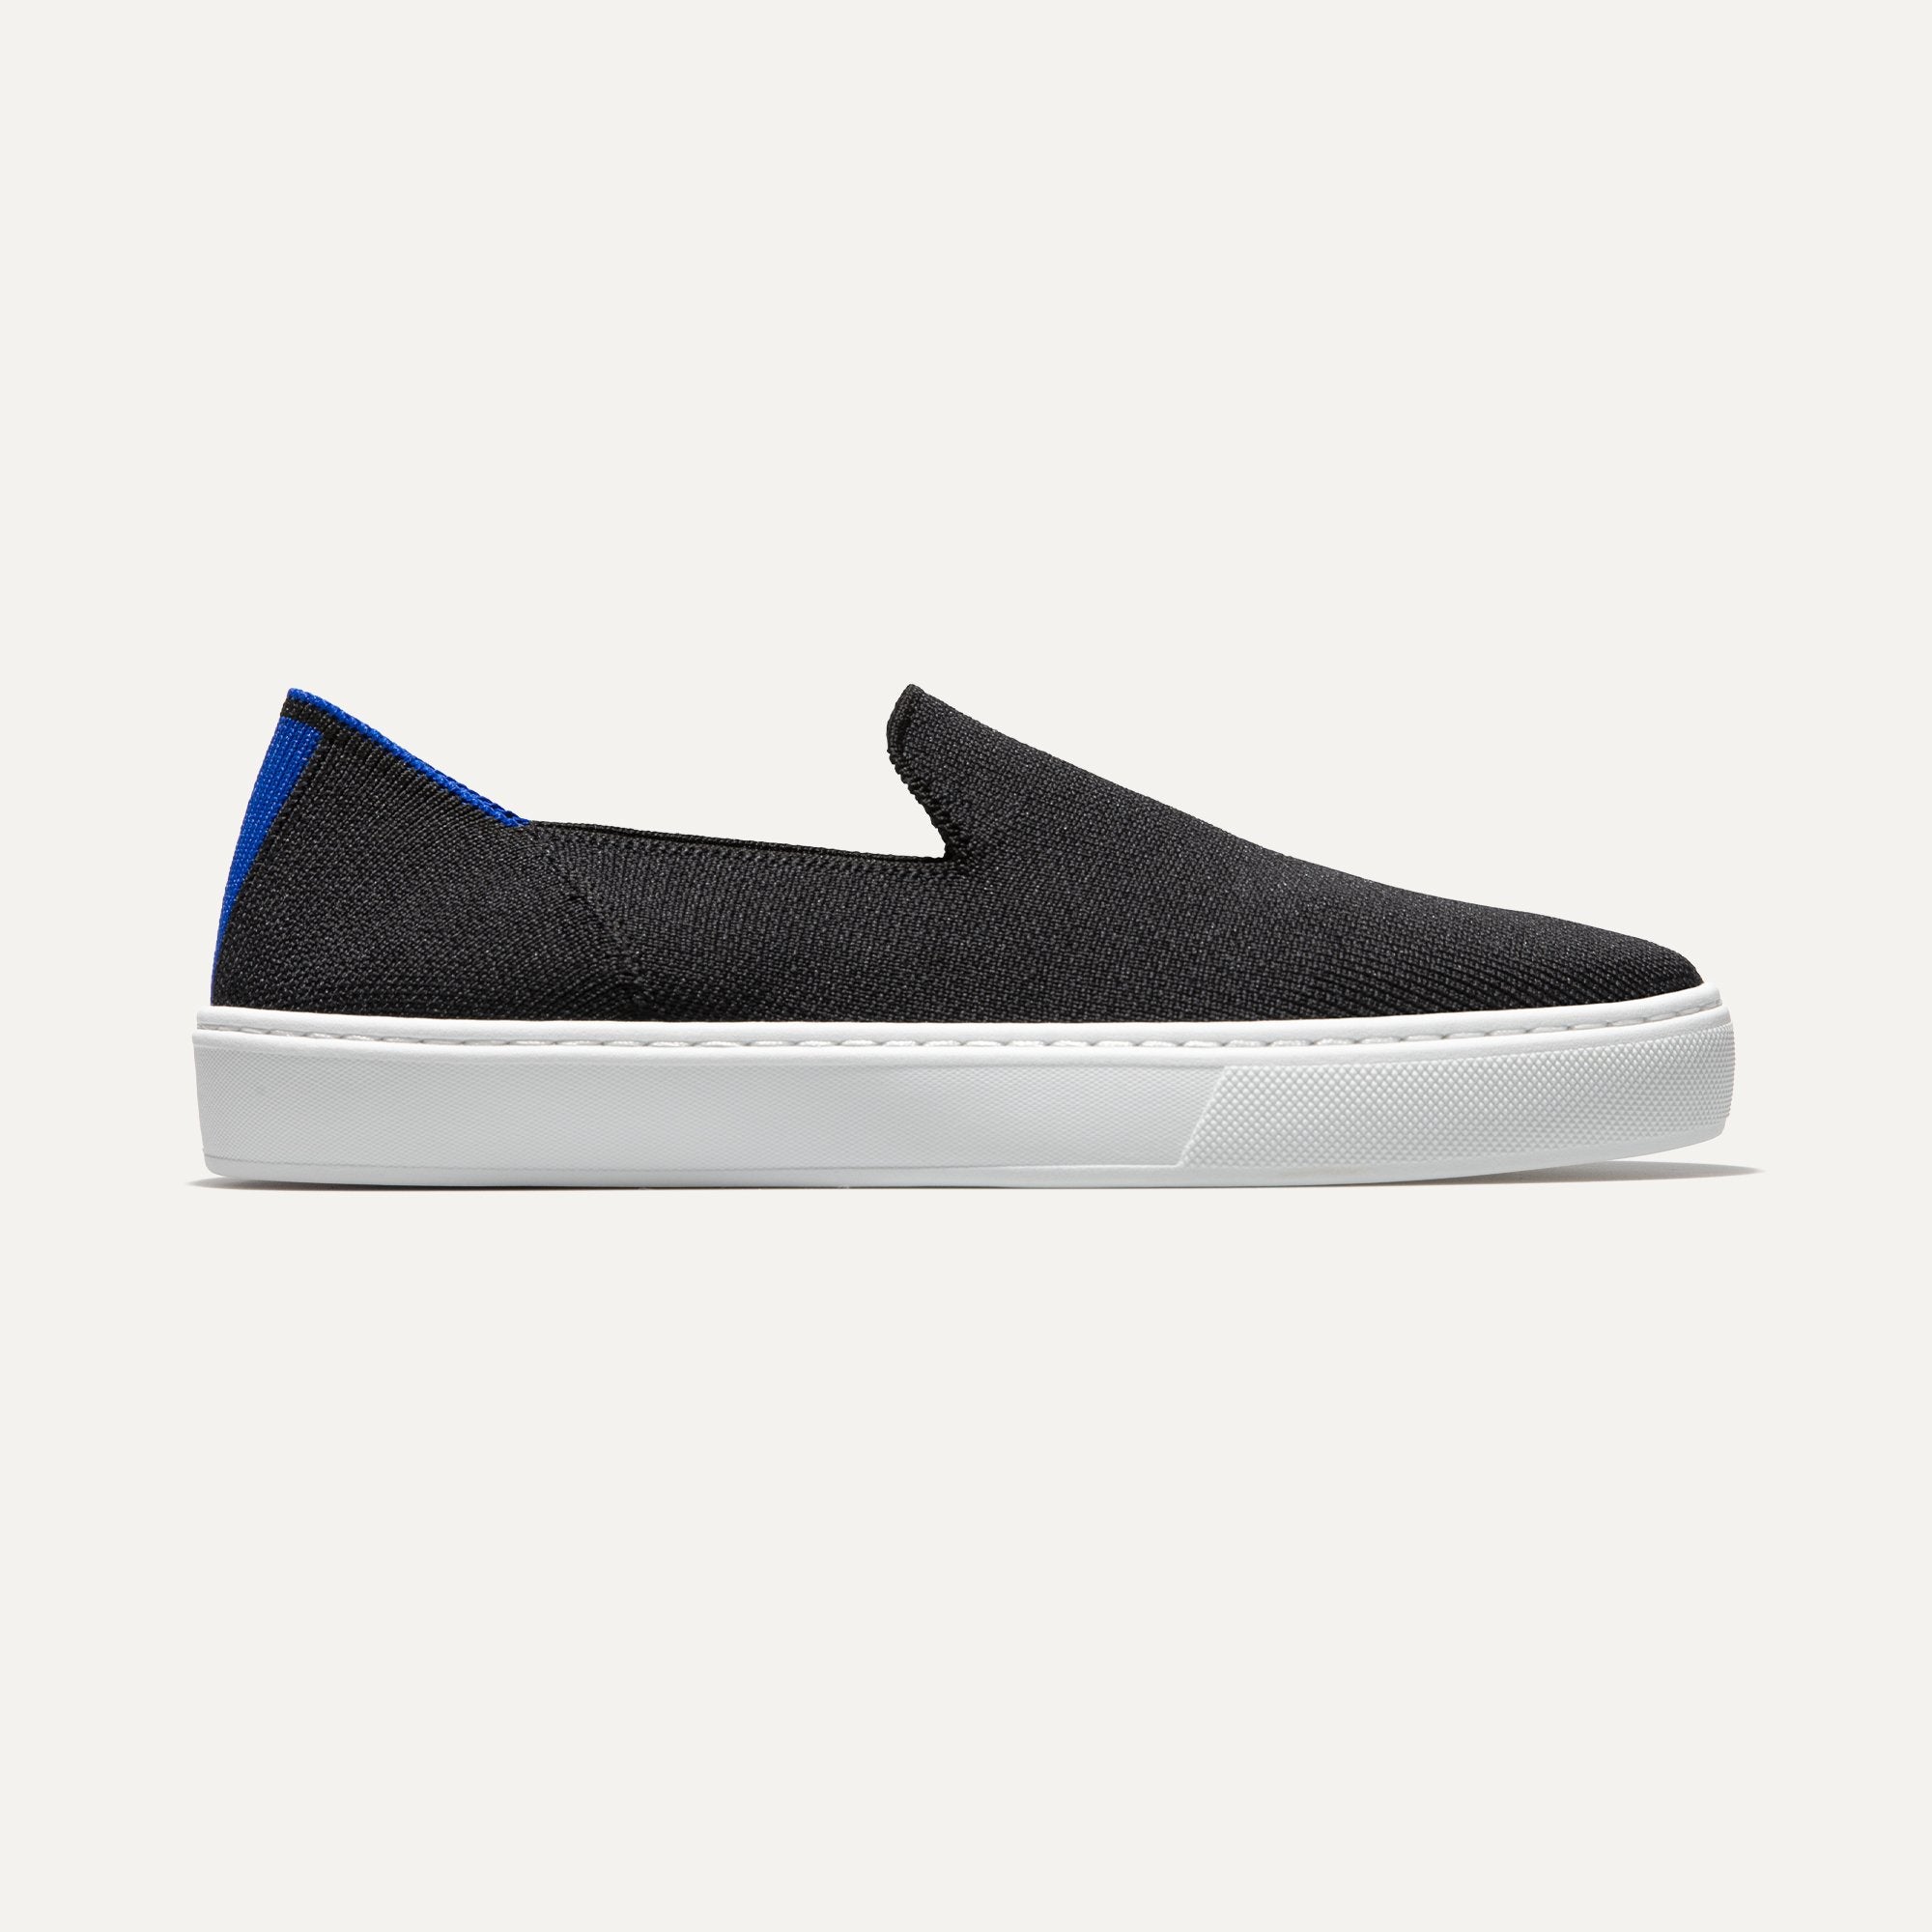 Dylann Grey Suede Slip-On Platform Sneakers | Fashion shoes, Trendy shoes,  Spring fashion casual